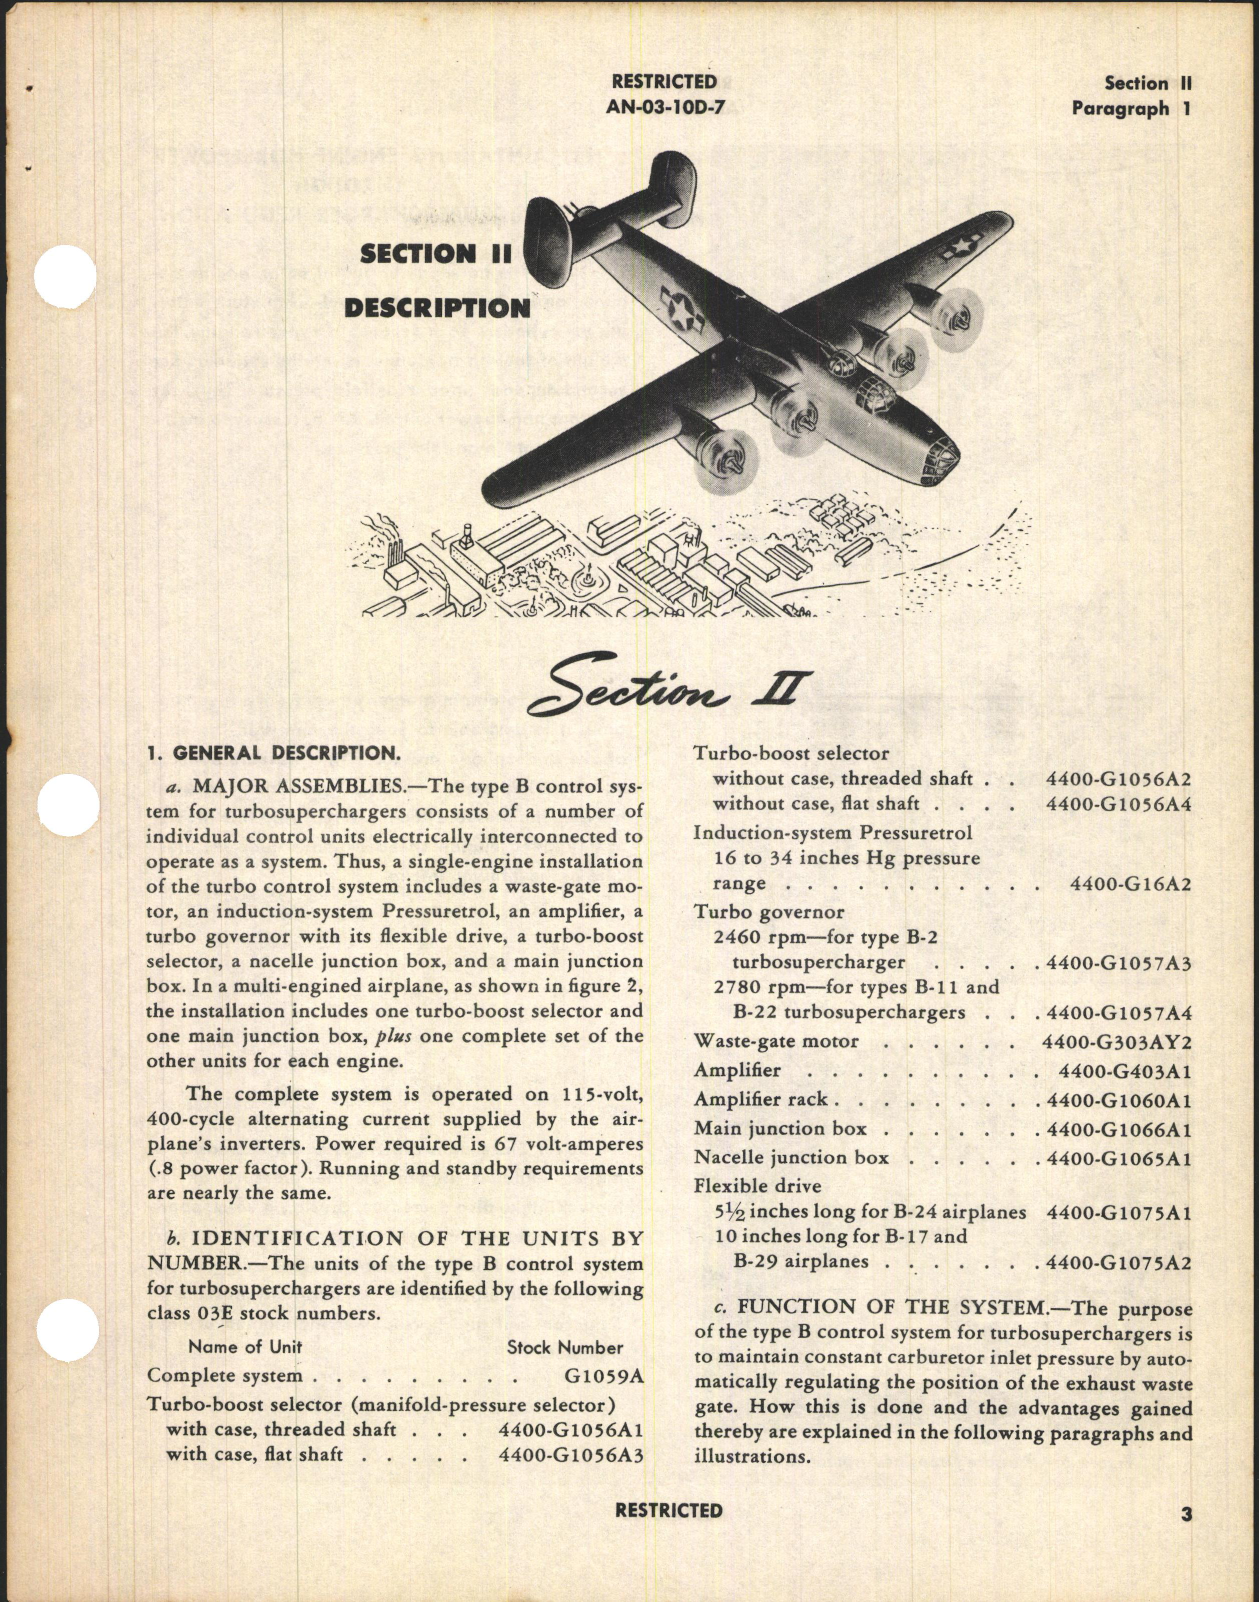 Sample page 7 from AirCorps Library document: Overhaul Instructions with Parts Catalog for Type B Electronic Control System (Turbosupercharger Regulator)